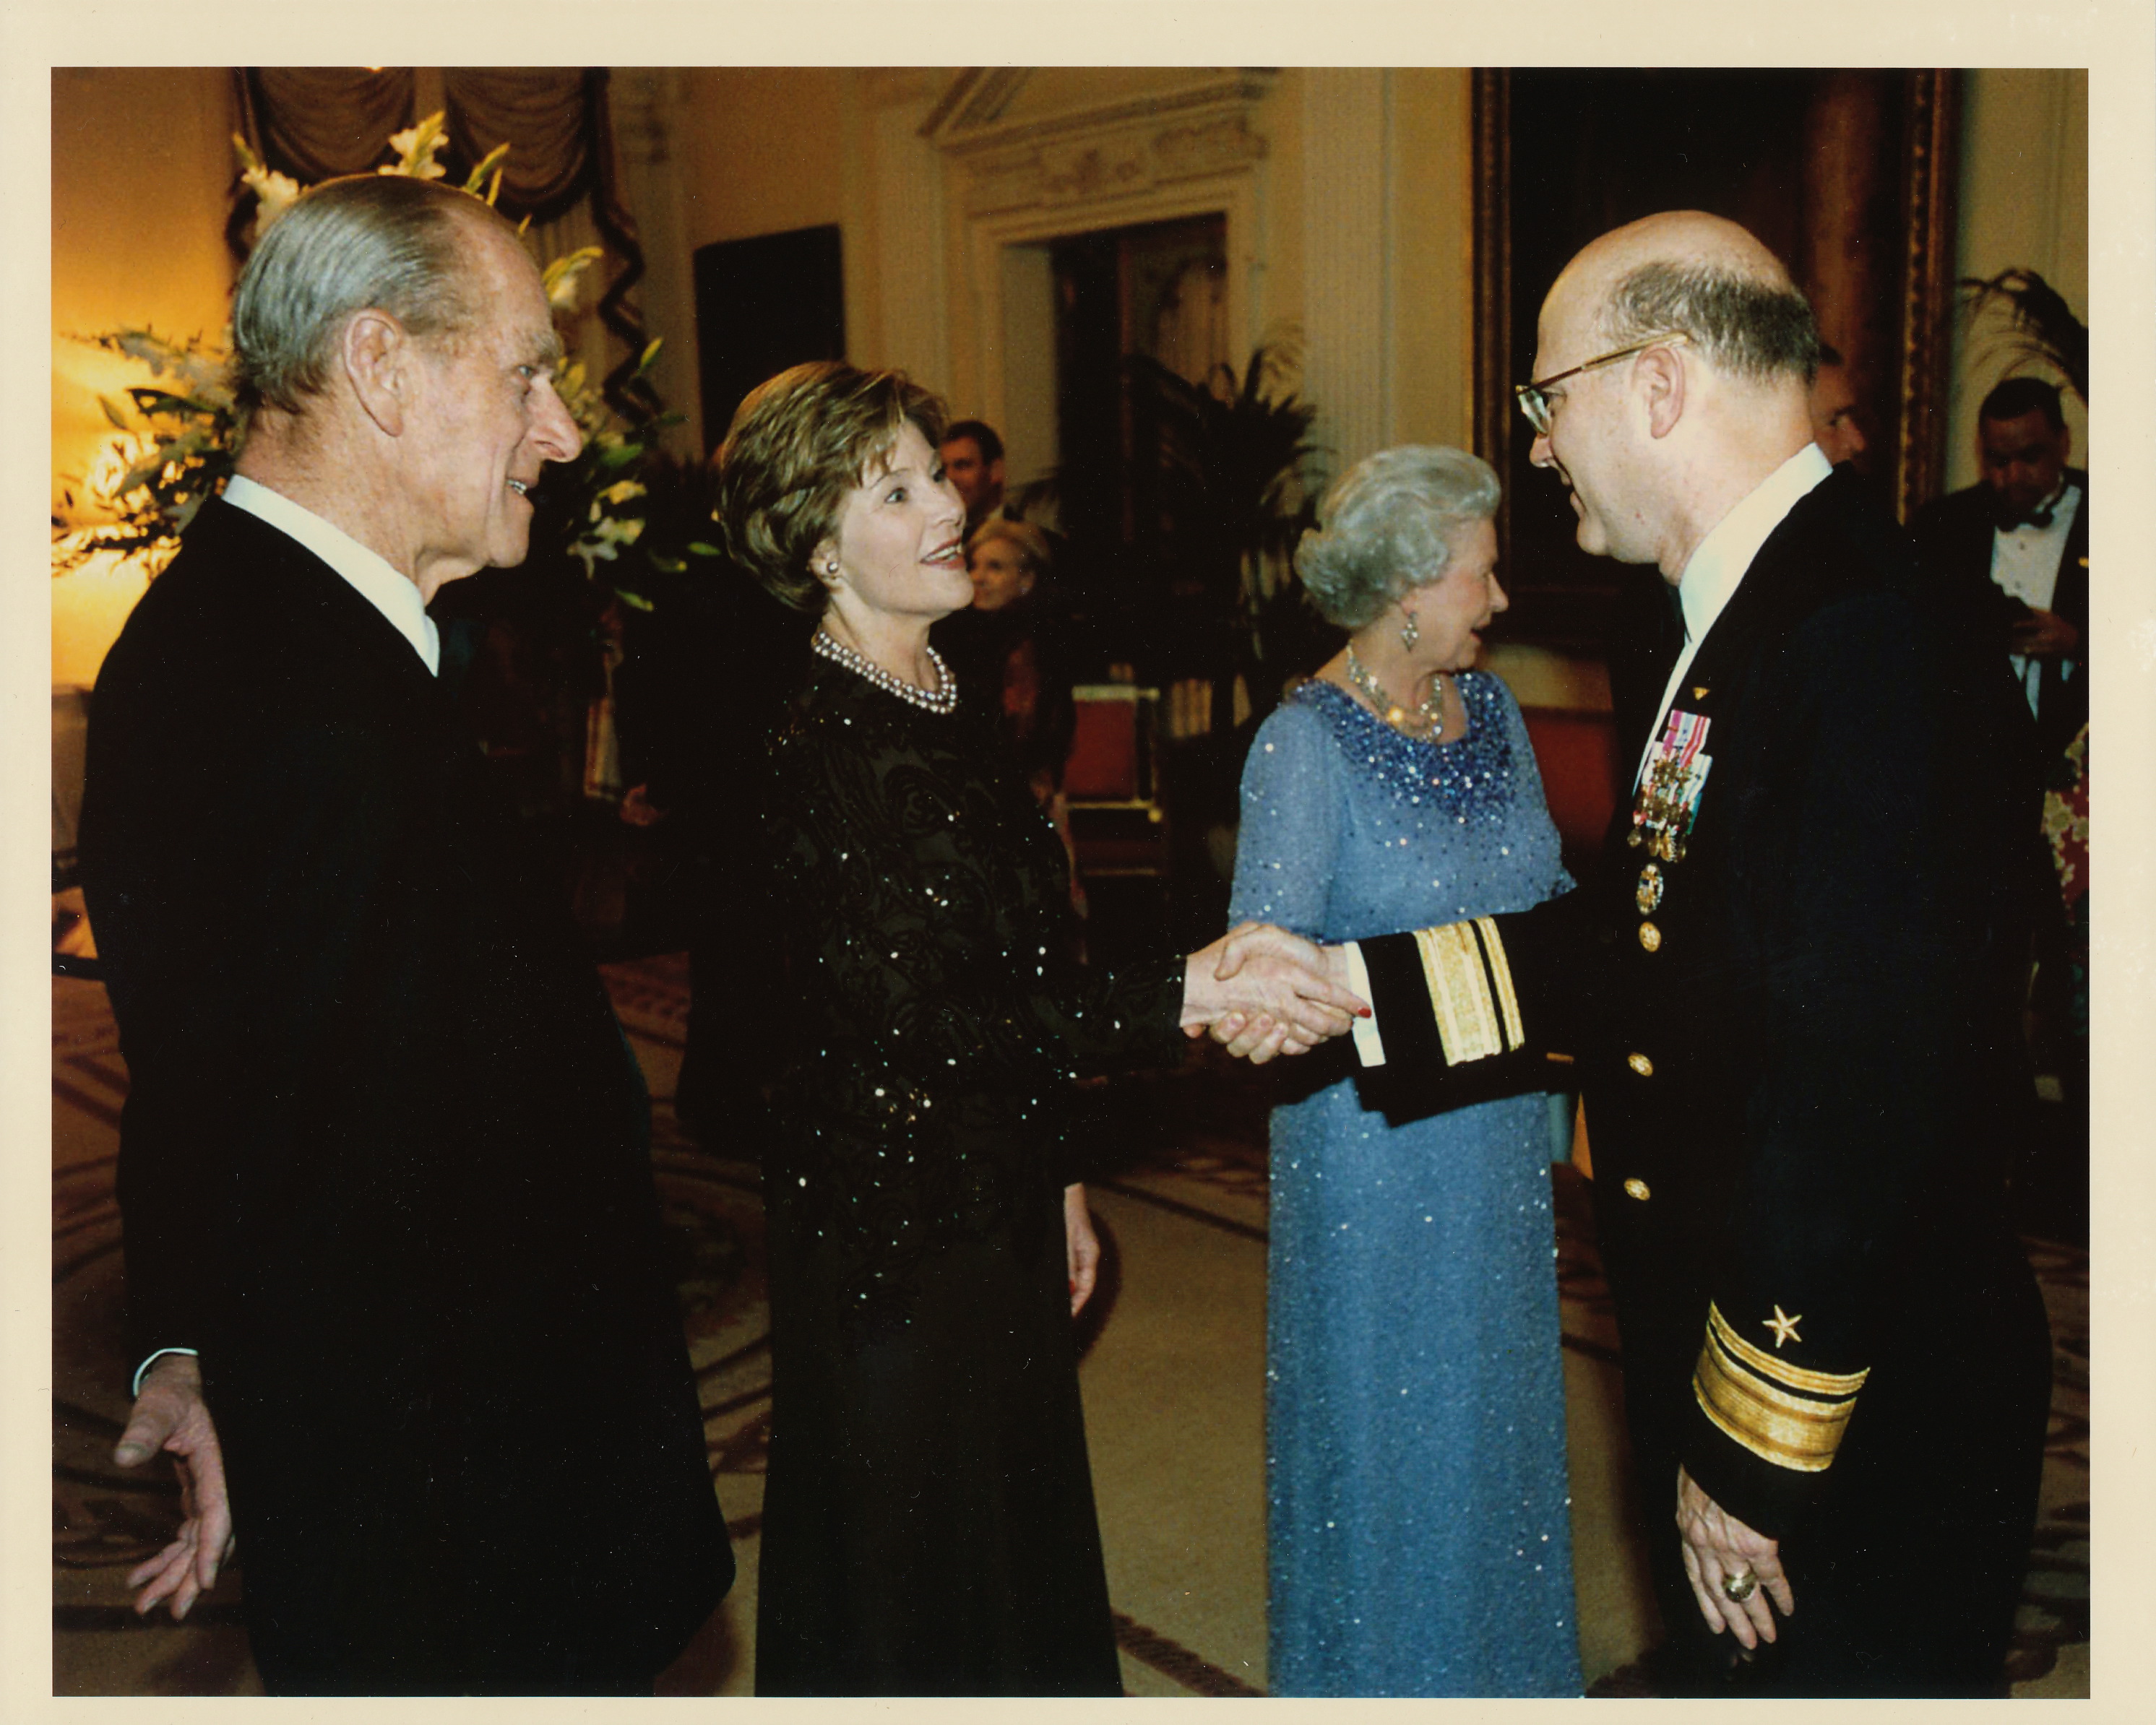 Lou meets the Queen, First Lady Laura Bush and Prince Phillip as Commander Navy Region Europe